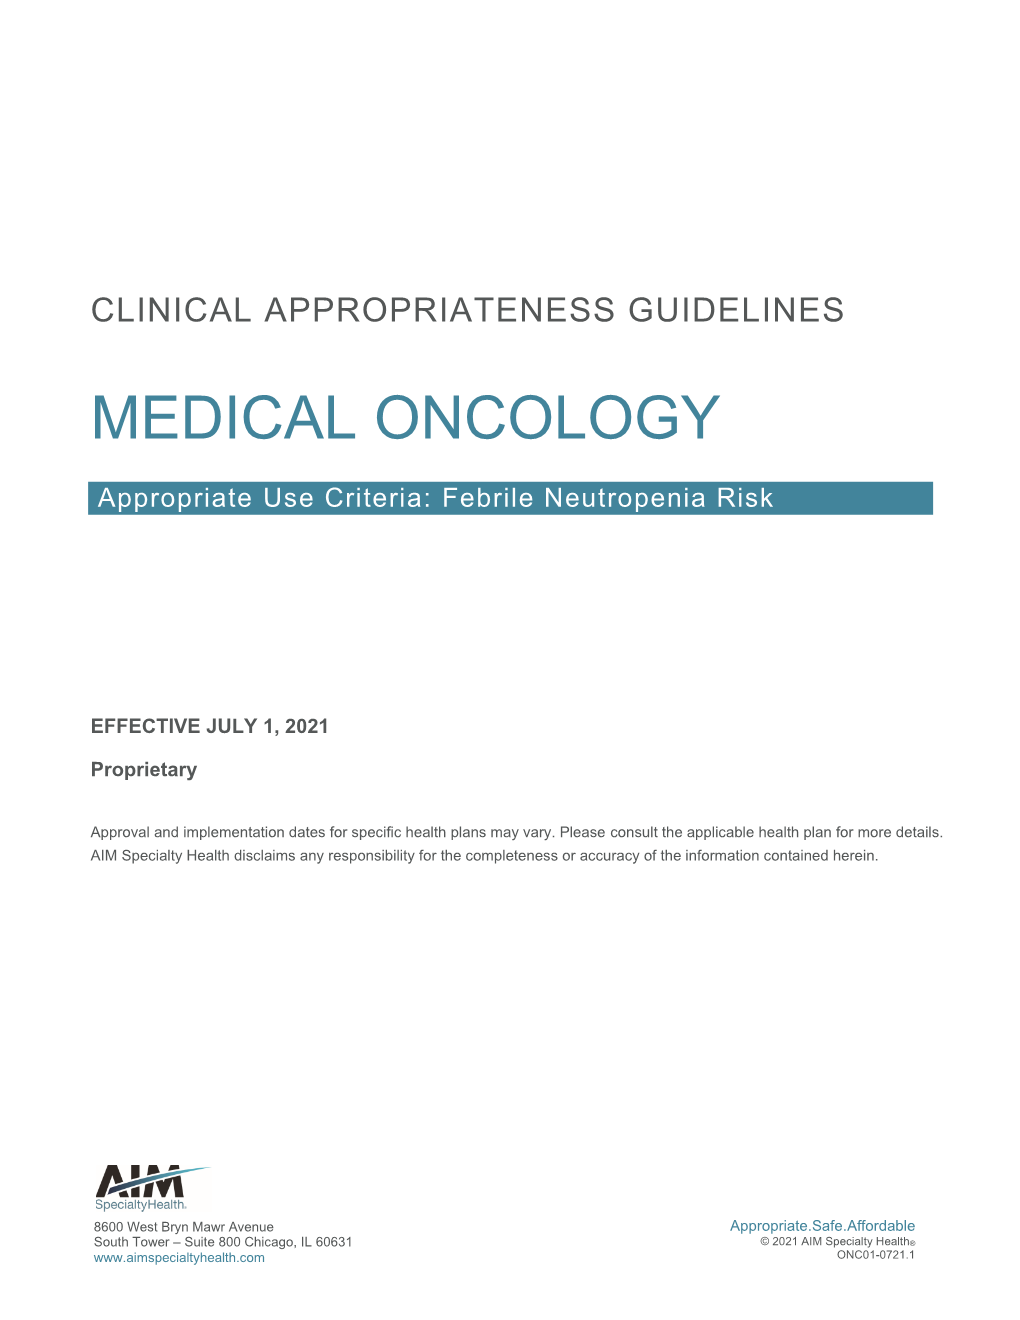 Open the Guidelines for Febrile Neutropenia